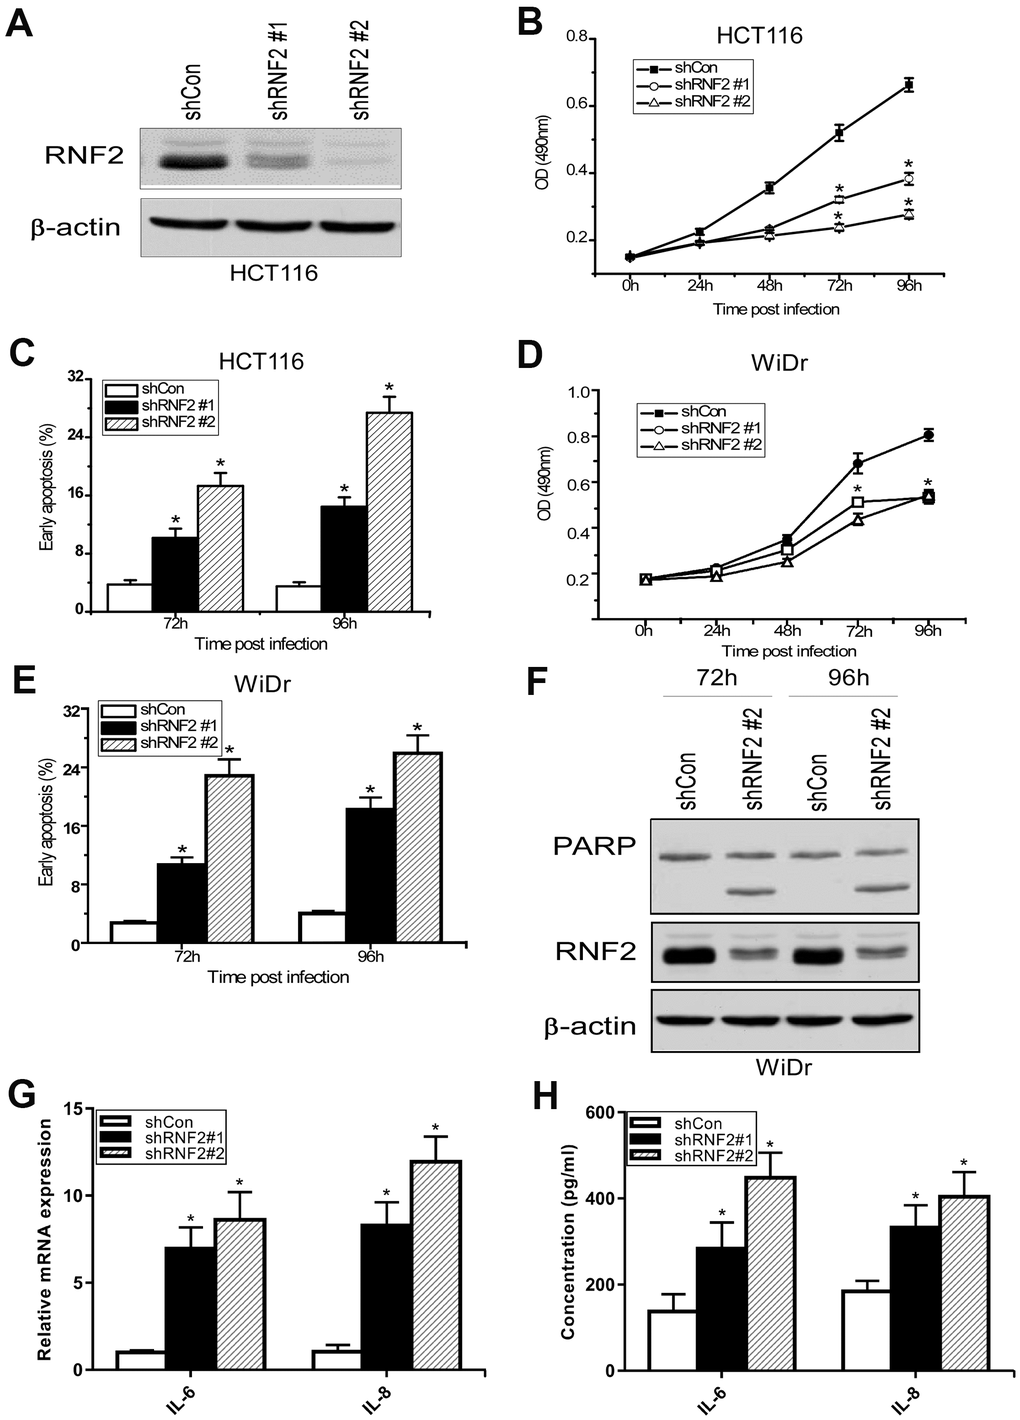 The downregulation of RNF2 inhibited cell proliferation and increased apoptosis in CRC cells. (A) Western blot analysis showing the knockdown efficiency of RNF2 in HCT116 cells that had been infected with shRNA-expressing lentiviruses for 48 hours. (B) MTT assay showing the proliferation of RNF2-knockdown and control HCT116 cells. (C) Apoptosis analysis of RNF2-knockdown and control HCT116 cells. (D) MTT assay showing the proliferation of RNF2-knockdown and control WiDr cells. (E) Apoptosis analysis of RNF2-knockdown and control WiDr cells. (F) Western blot analysis showing the knockdown efficiency of RNF2 and the cleavage of PARP in RNF2-knockdown and control WiDr cells. (G) qRT-PCR analysis showing the mRNA levels of IL-6 and IL-8 in RNF2-knockdown and control HCT116 cells. (H) ELISA assay showing the soluble IL-6 and IL-8 levels in culture media. Three independent experiments were performed and analyzed for B-E. Data represent the mean ± standard deviation. *p